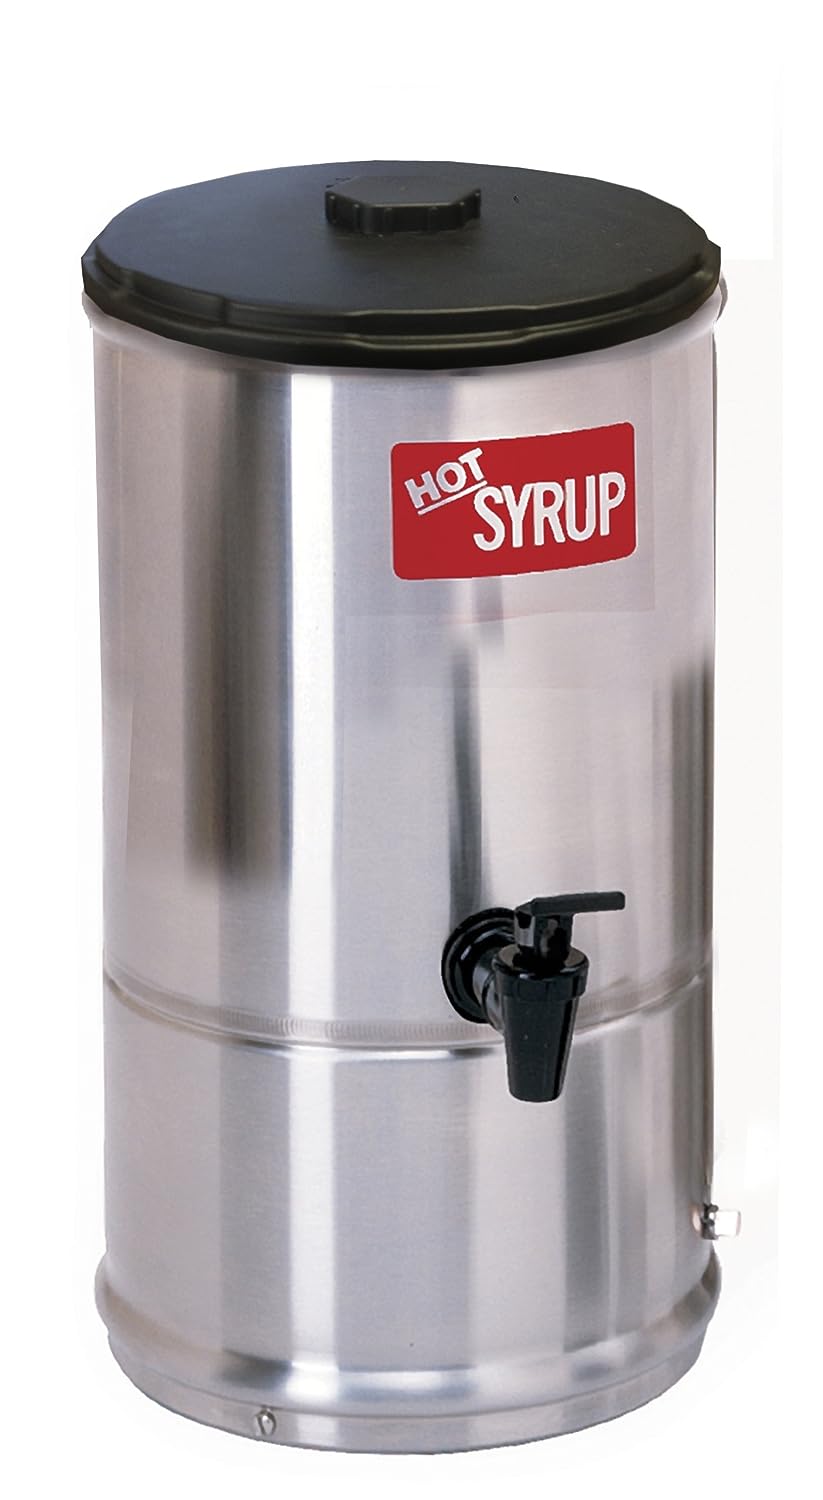 Warm Syrup and Topping Dispensers Market